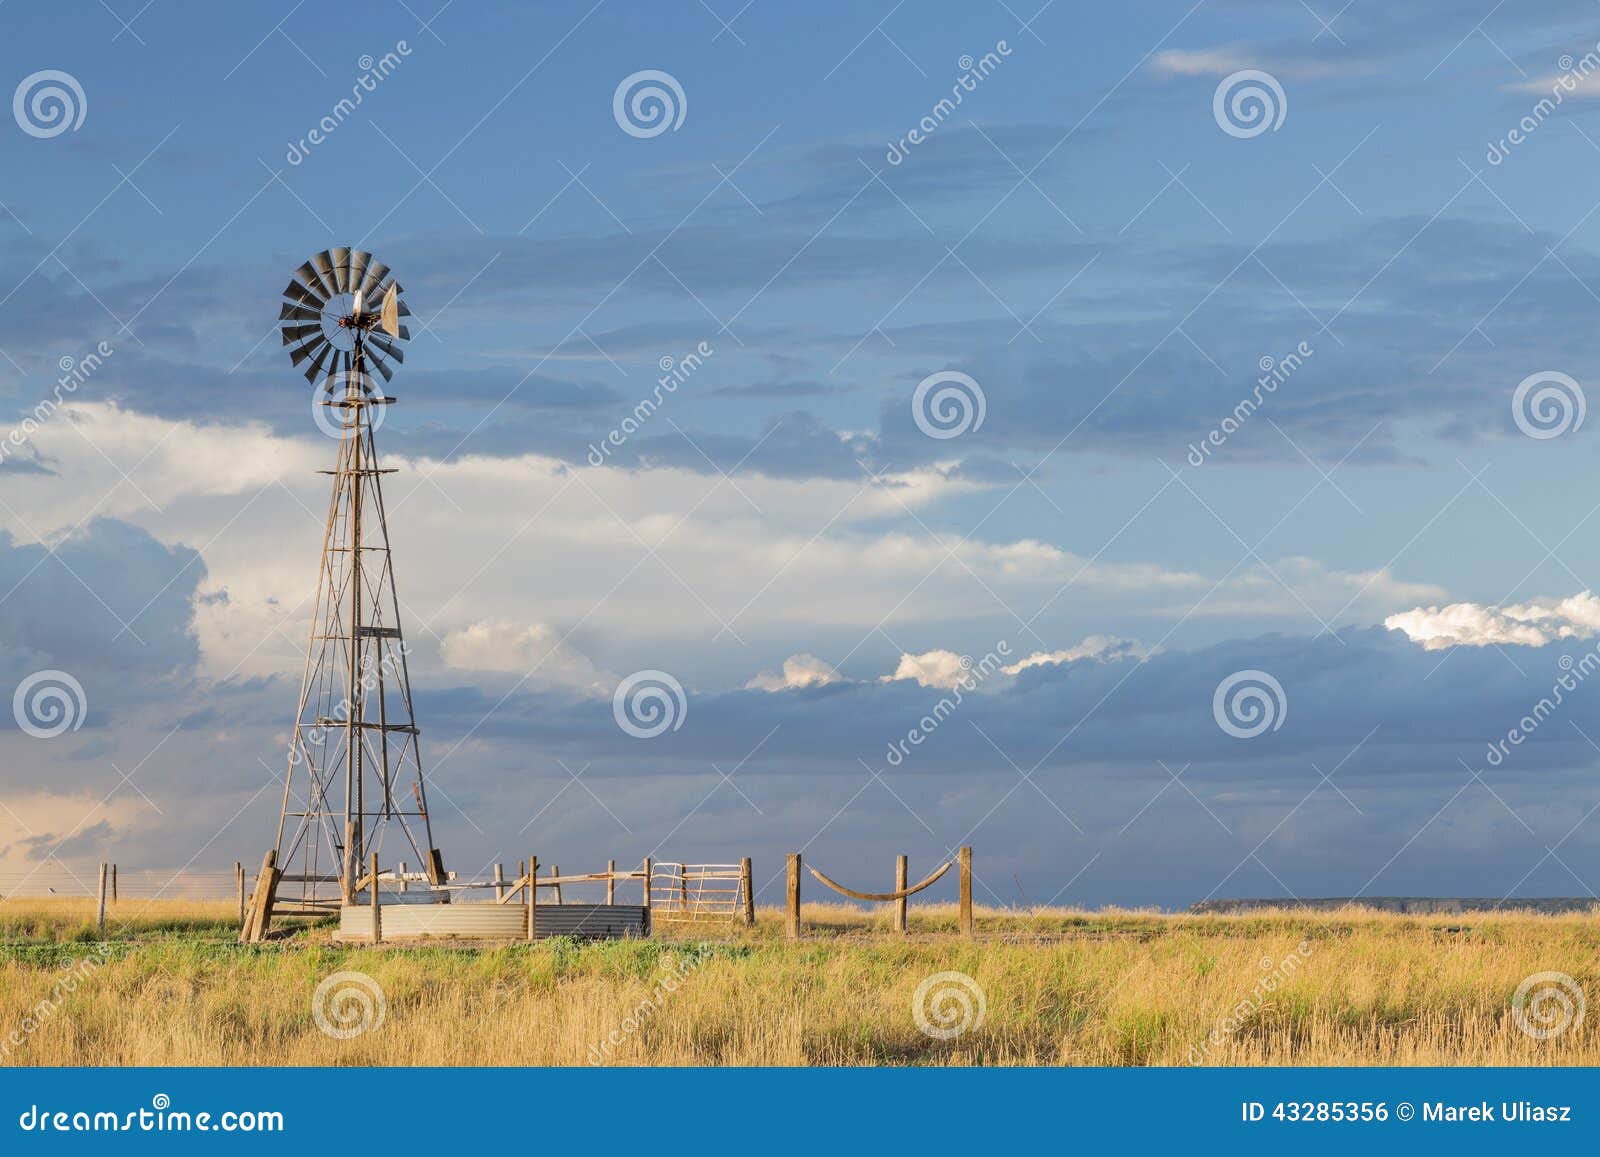 Windmill with a pump and cattle water tank in shortgrass prairie 